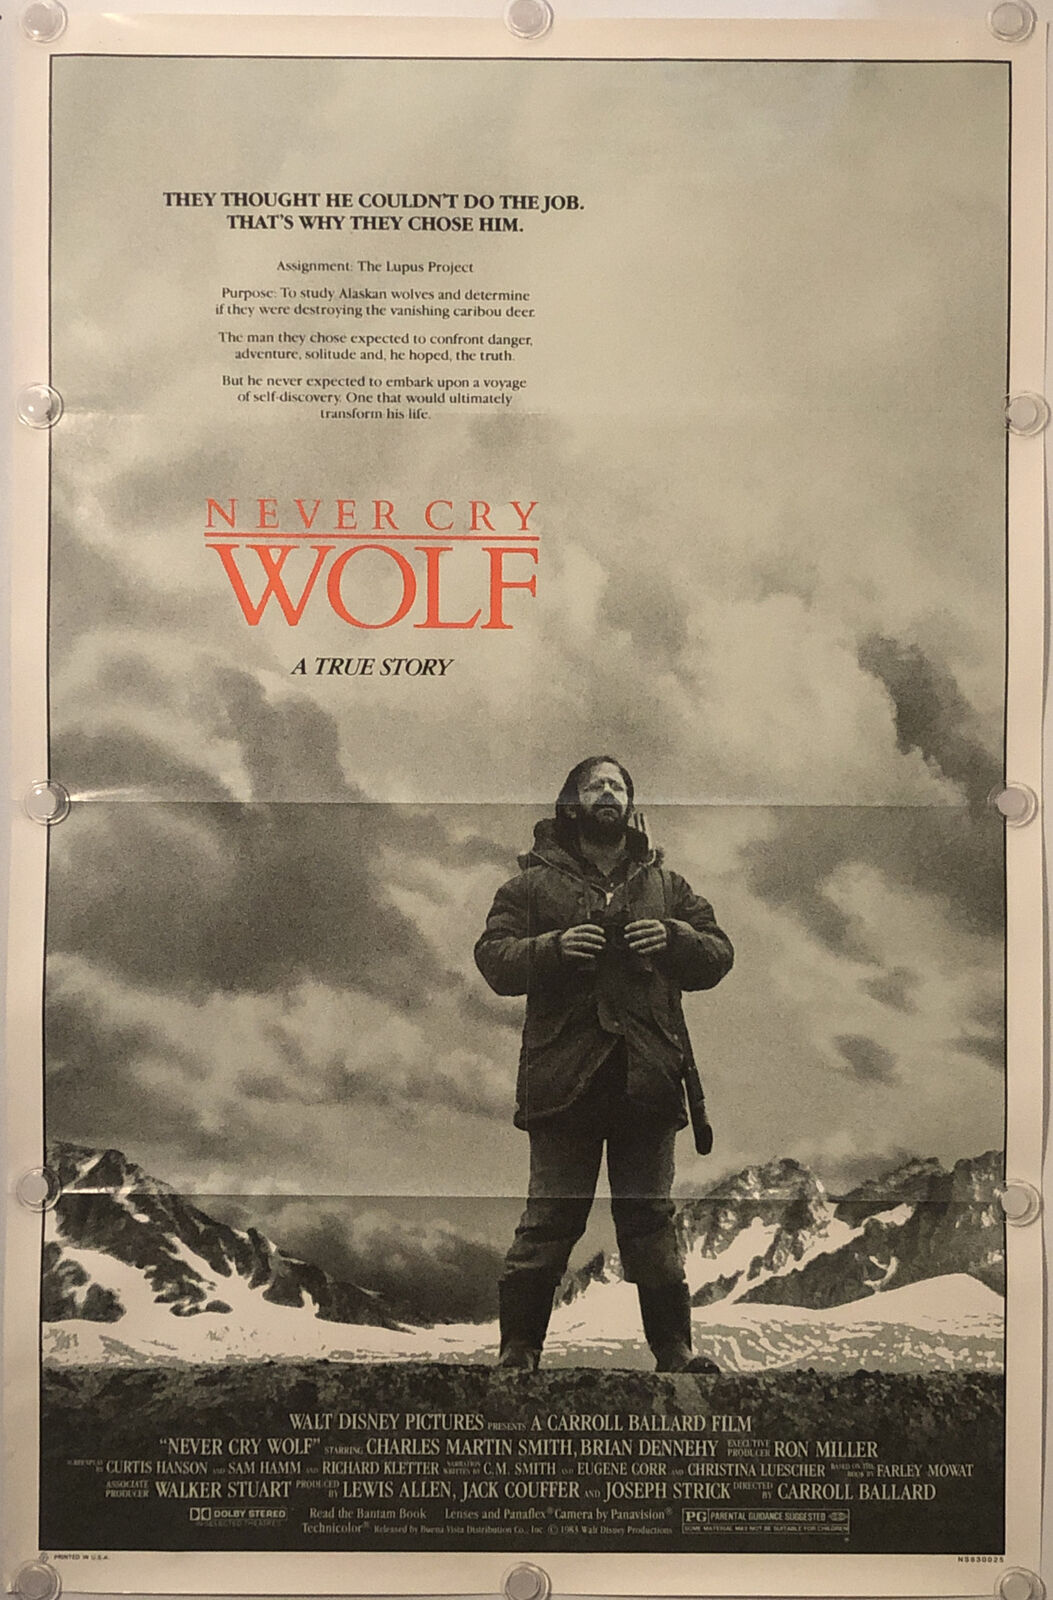 NEVER CRY WOLF Outlet sale feature Original One Sheet Movie Omaha Mall Folded 1983 Poster W -